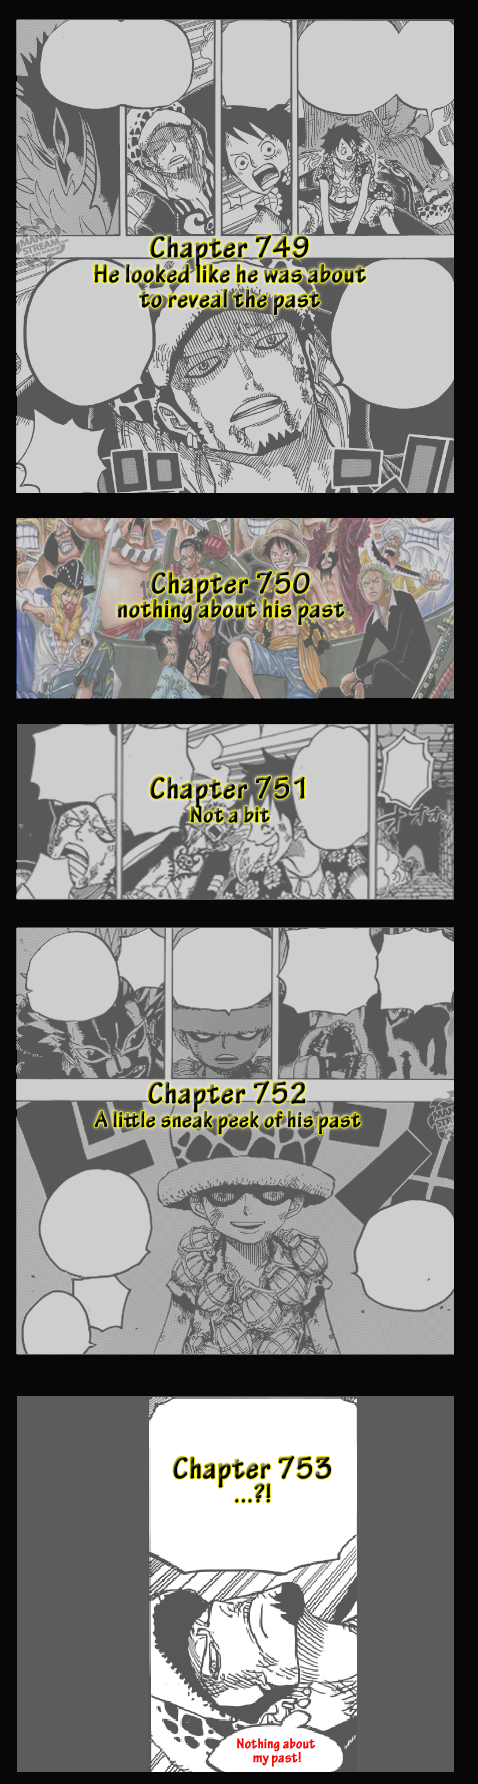 Law&#8217;s forever awaiting mysterious past
And again, this new chapter, nothing about Law&#8217;s past. Oda sure is sitting and laughing right now.

Such a tease. Pretty sure he did this on purpose. 

P/s&#160;: But, I can wait. Like I always do. I have been with this manga for almost 15 years&#8230; so waiting for like ten twenty chapters are nothing&#8230; teehee!